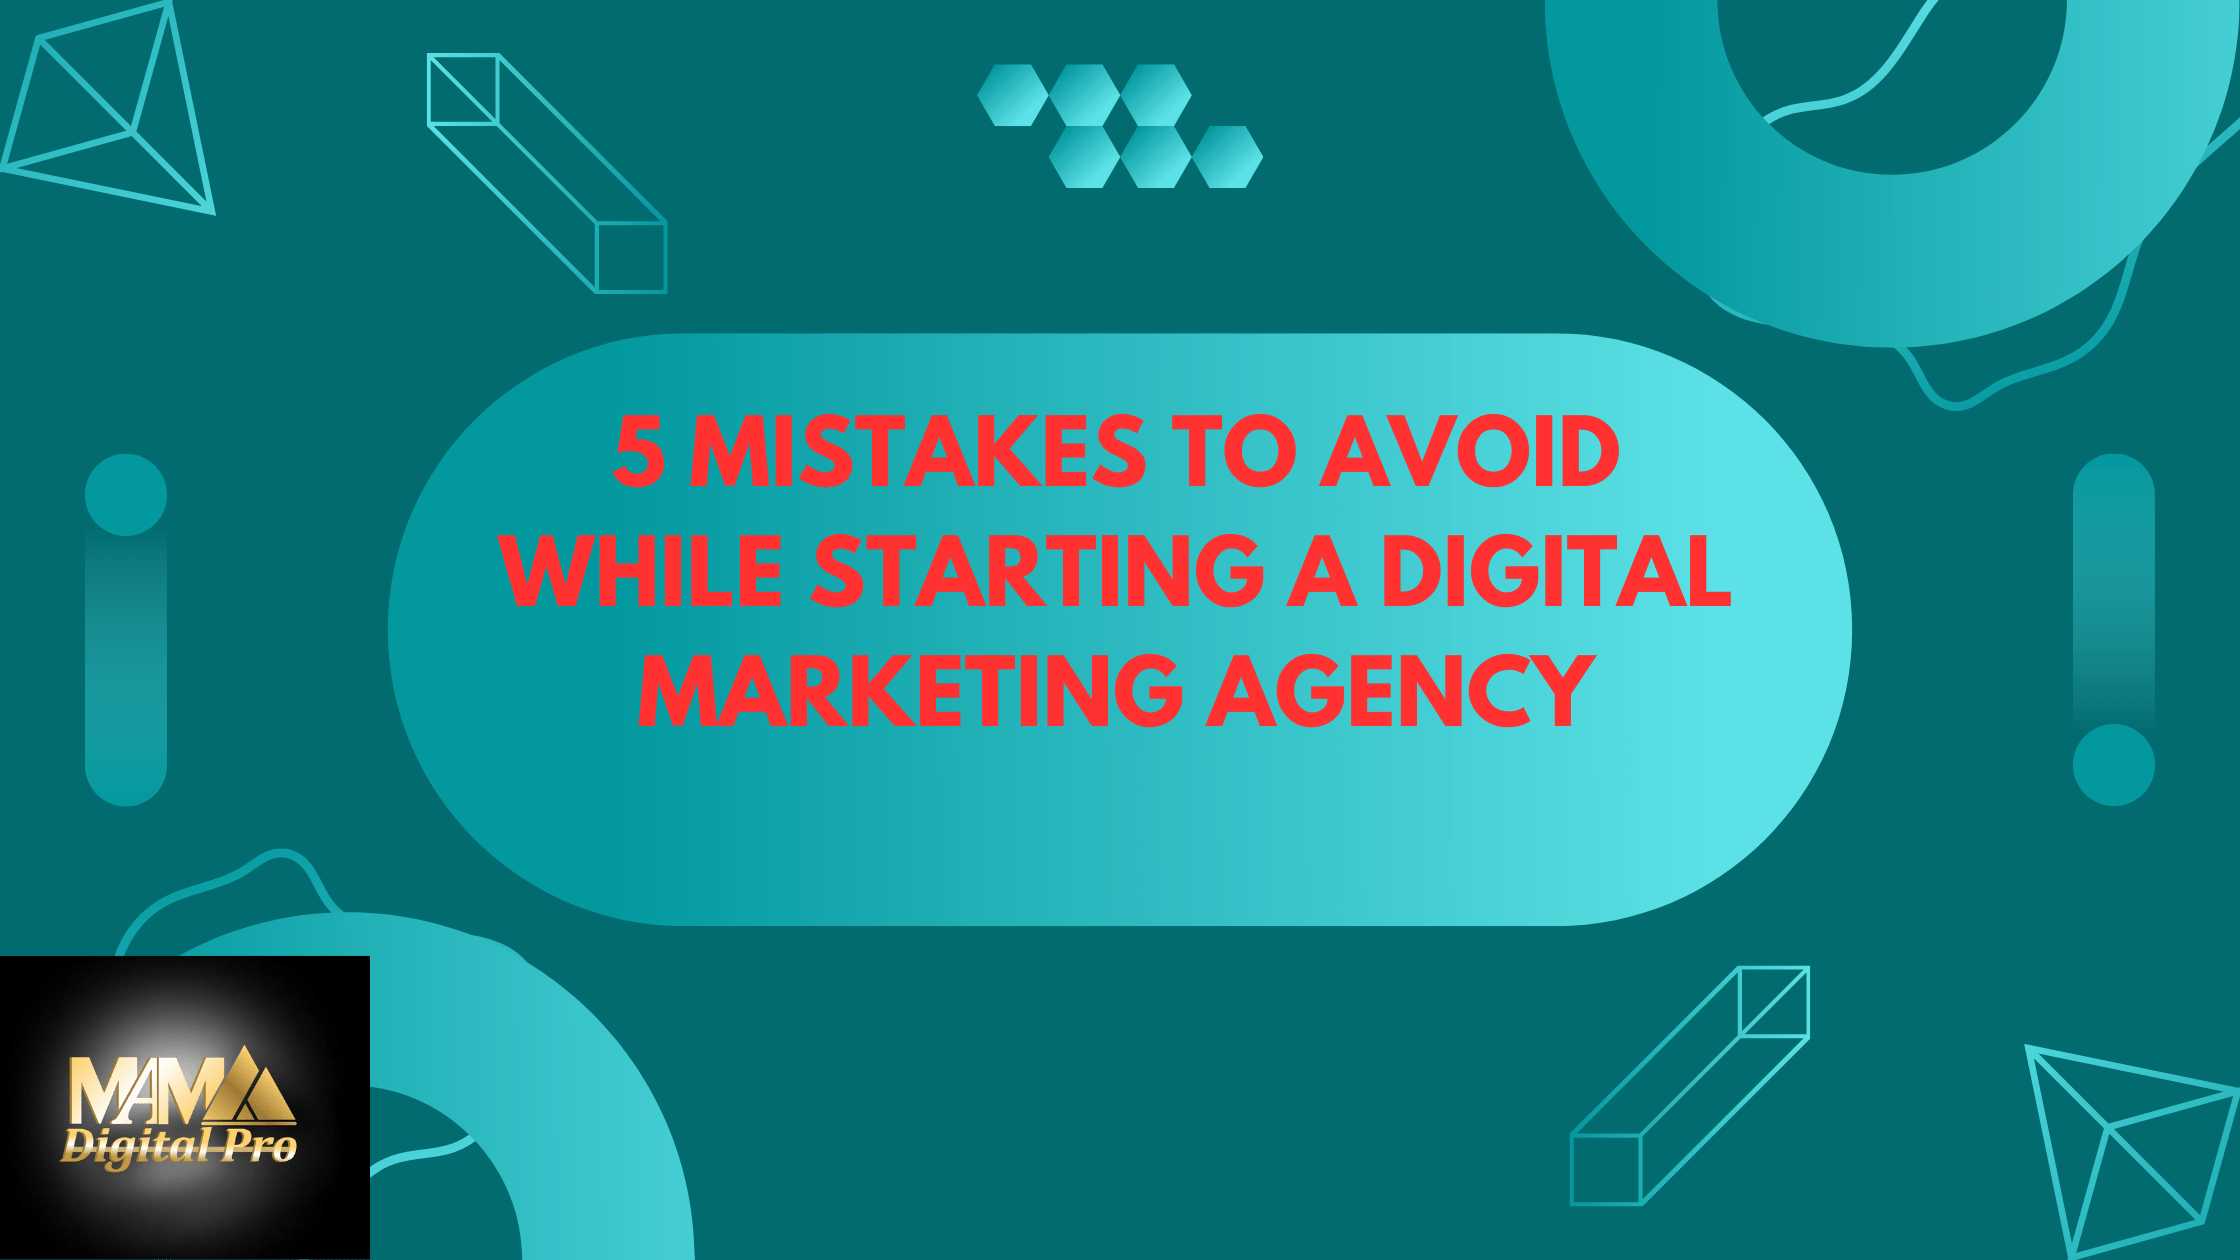 5 Common Mistakes to Avoid When Starting Your Digital Marketing Agency